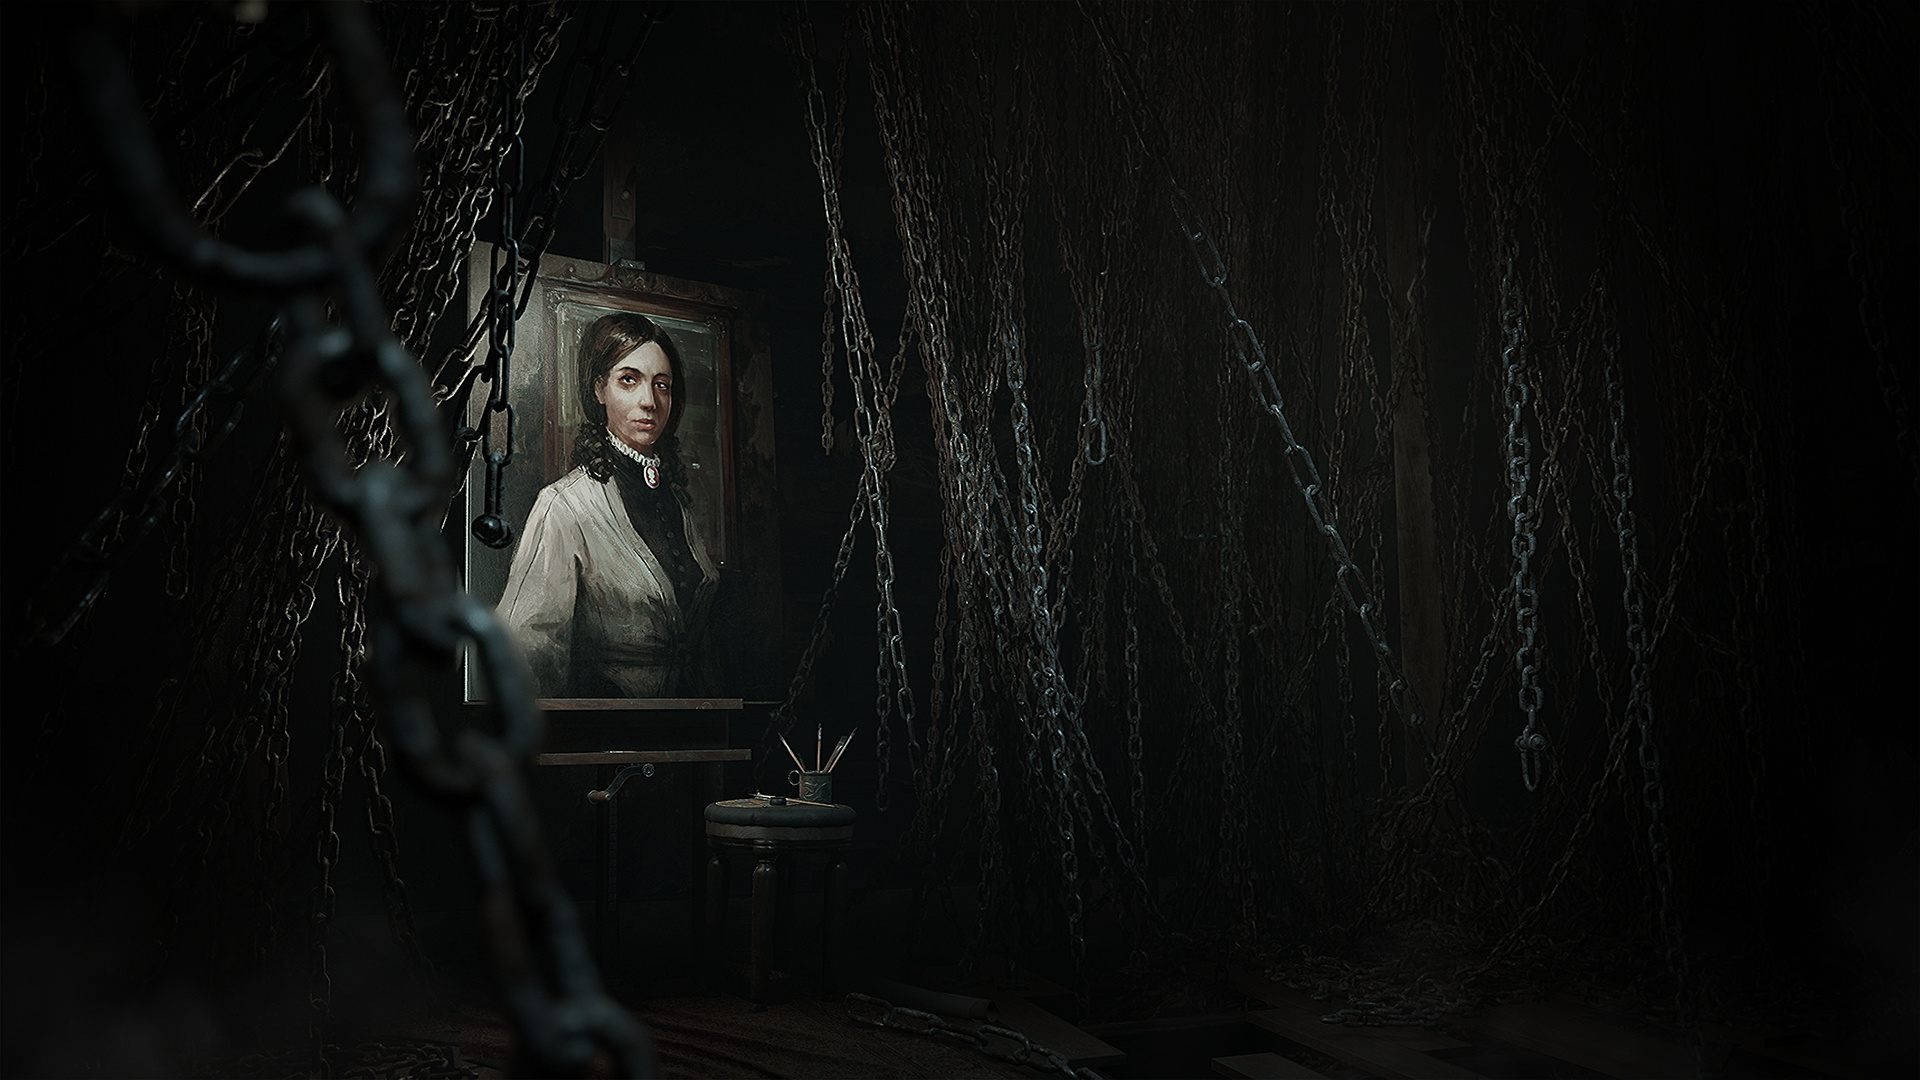 Layers Of Fear - Haunting Chained Portrait